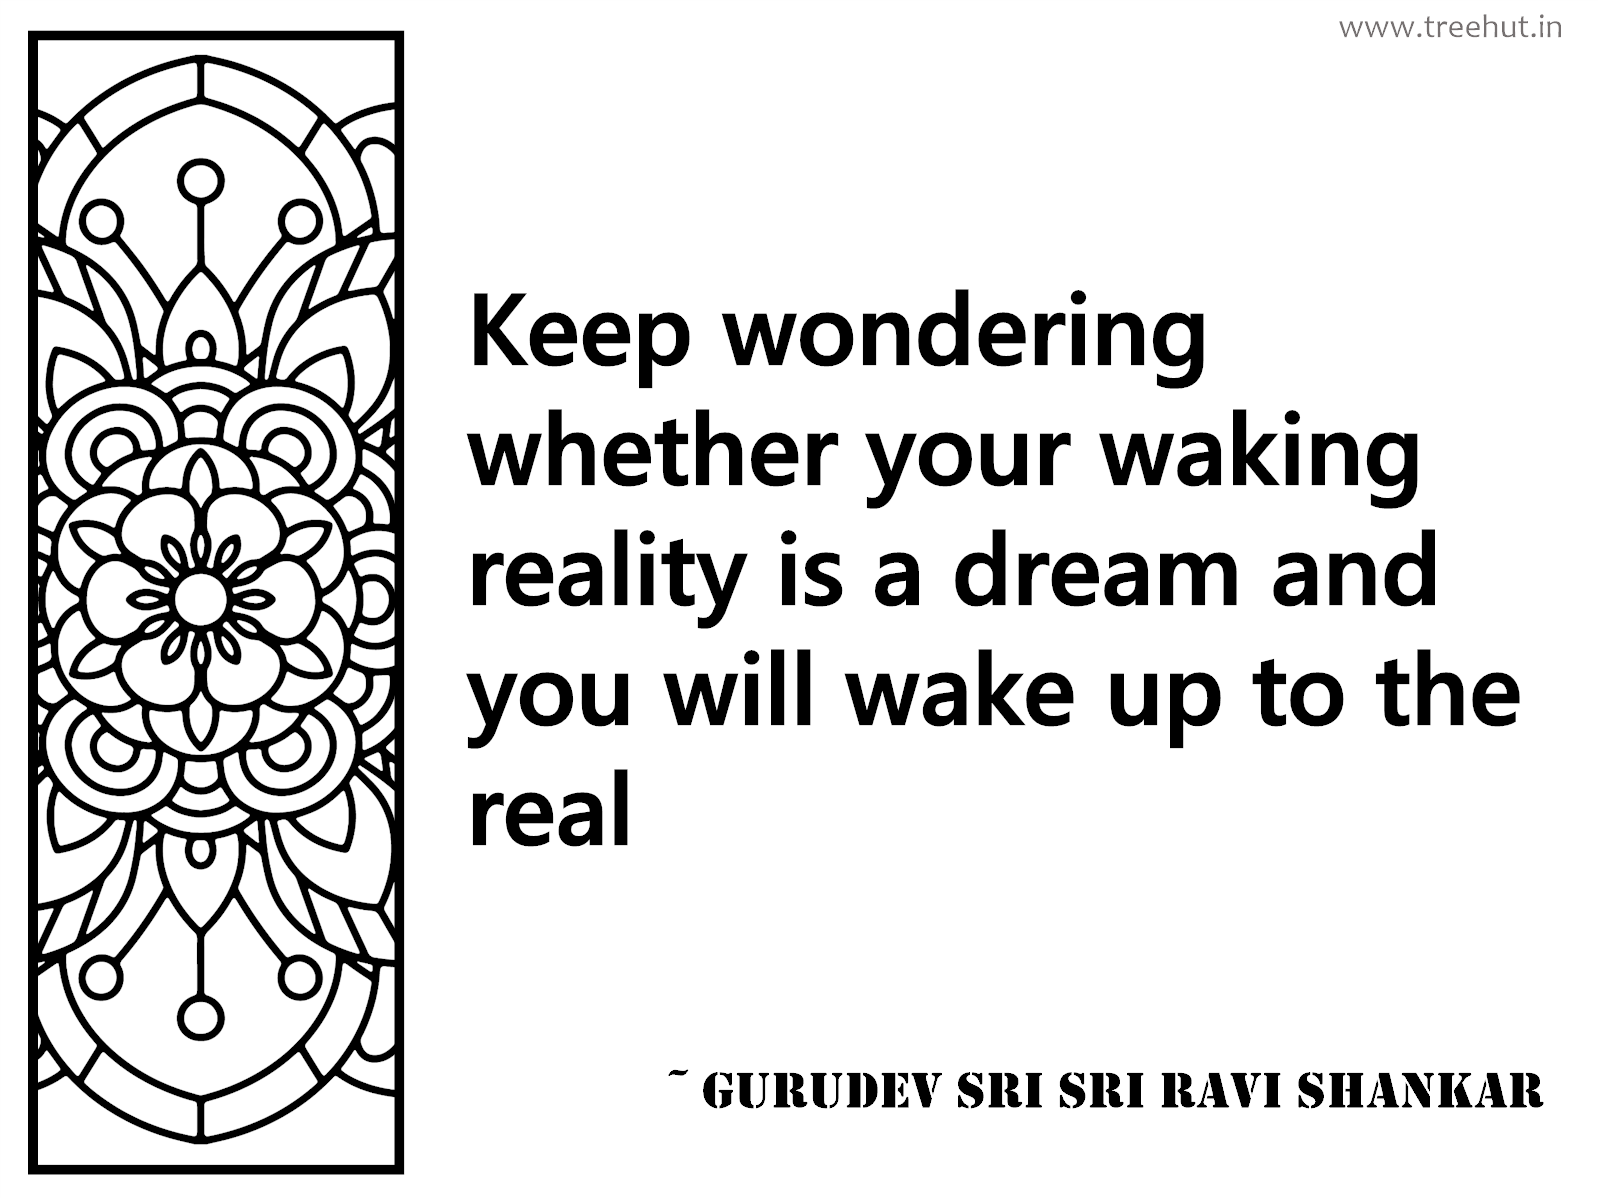 Keep wondering whether your waking reality is a dream and you will wake up to the real Inspirational Quote by Gurudev Sri Sri Ravi Shankar, coloring pages